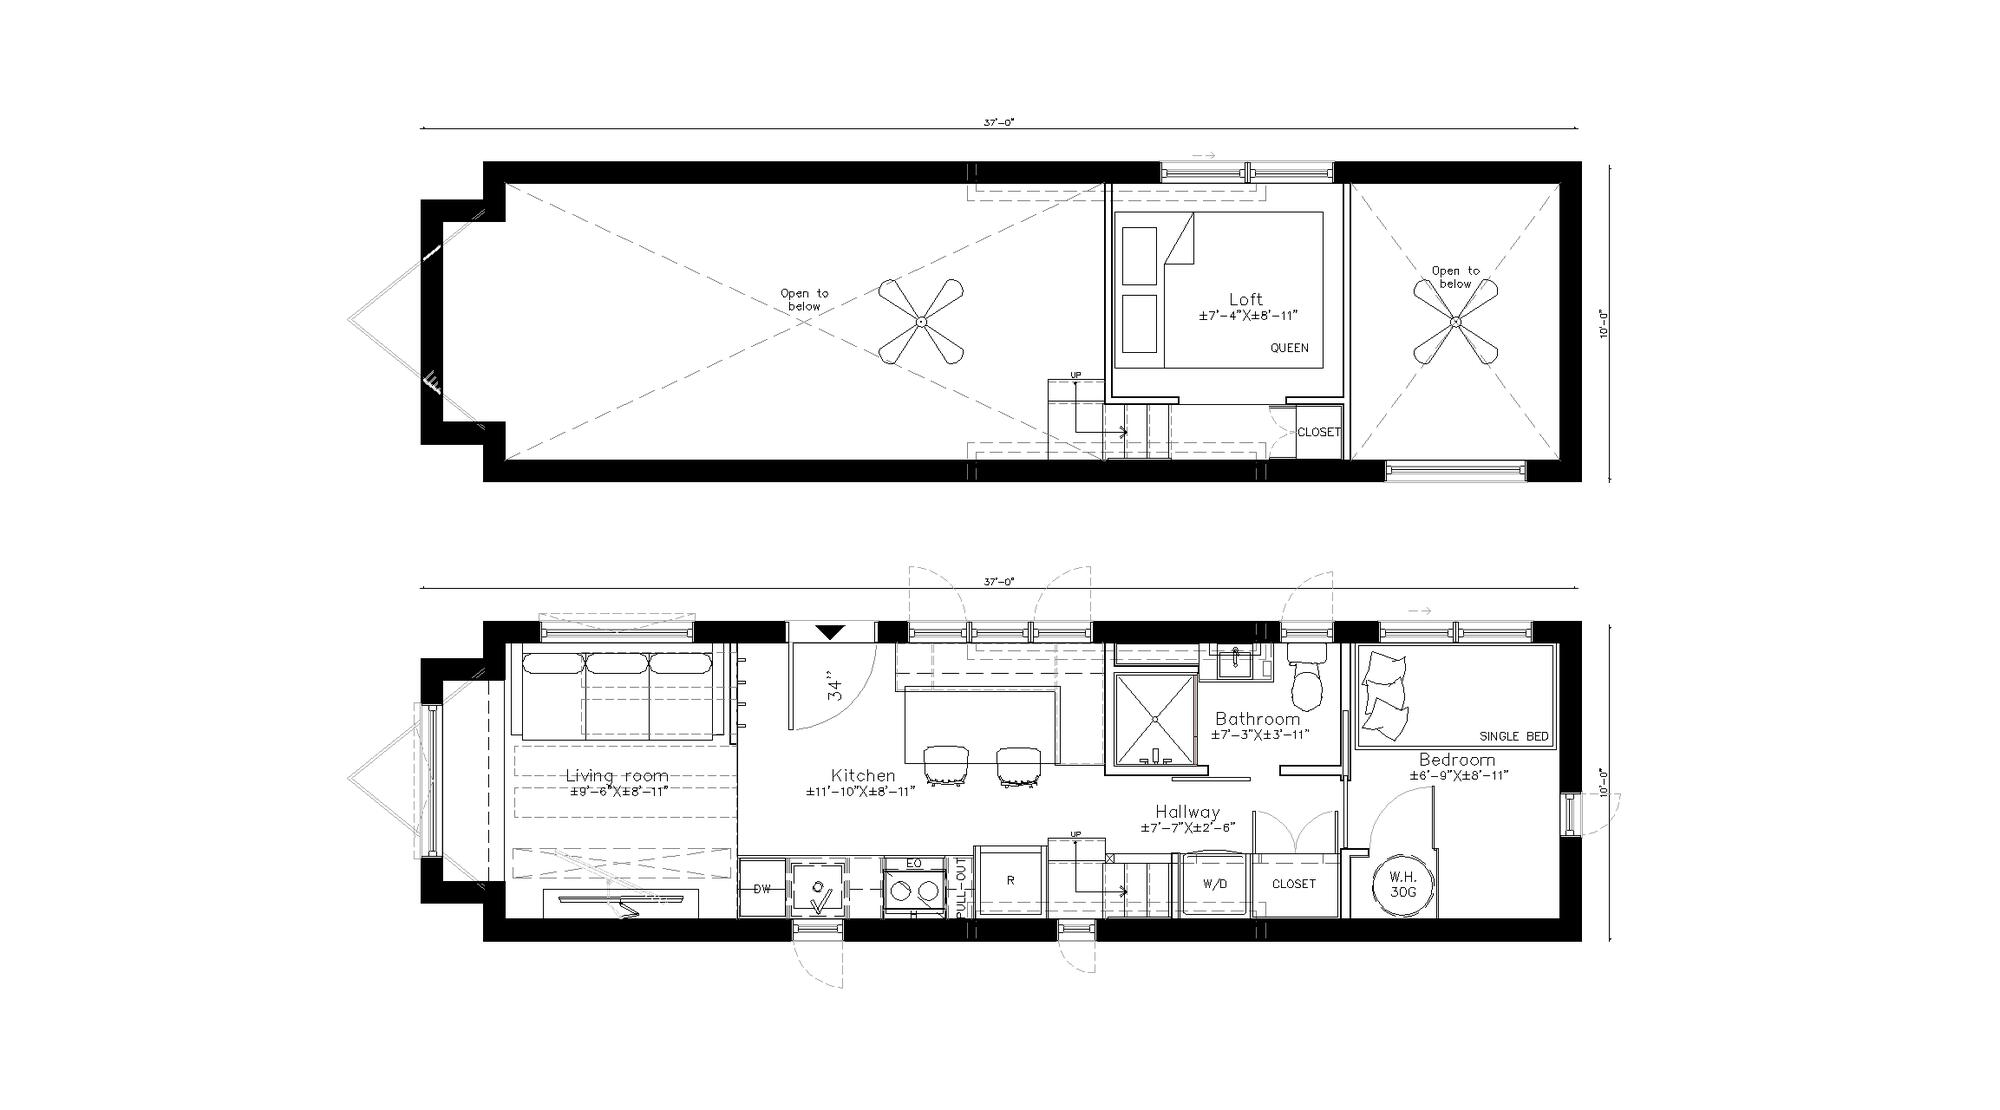 Floor plan - without option